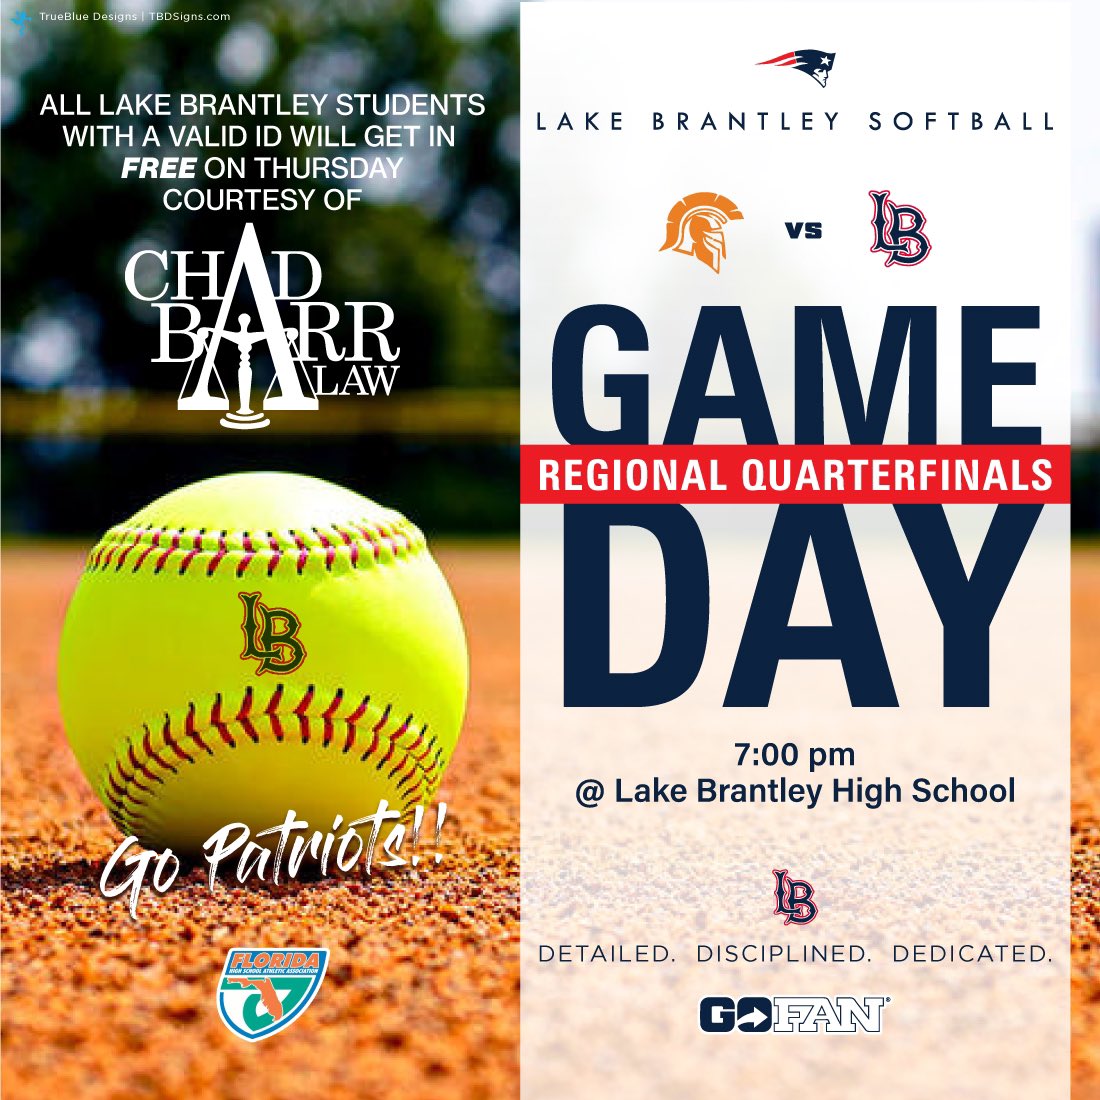 All Lake Brantley students with a valid student I.D get in free tonight curtesy of Chad Barr Law! (@AttyChadBarr) #GoPatriots #WhateverItTakes @JCCarnz @osvarsity @VarsityBuddy 📆 Today 🆚 University (OC) ⏰ 7:00pm 📍Brantley South Softball Complex 🎟 gofan.co/event/1517561?…